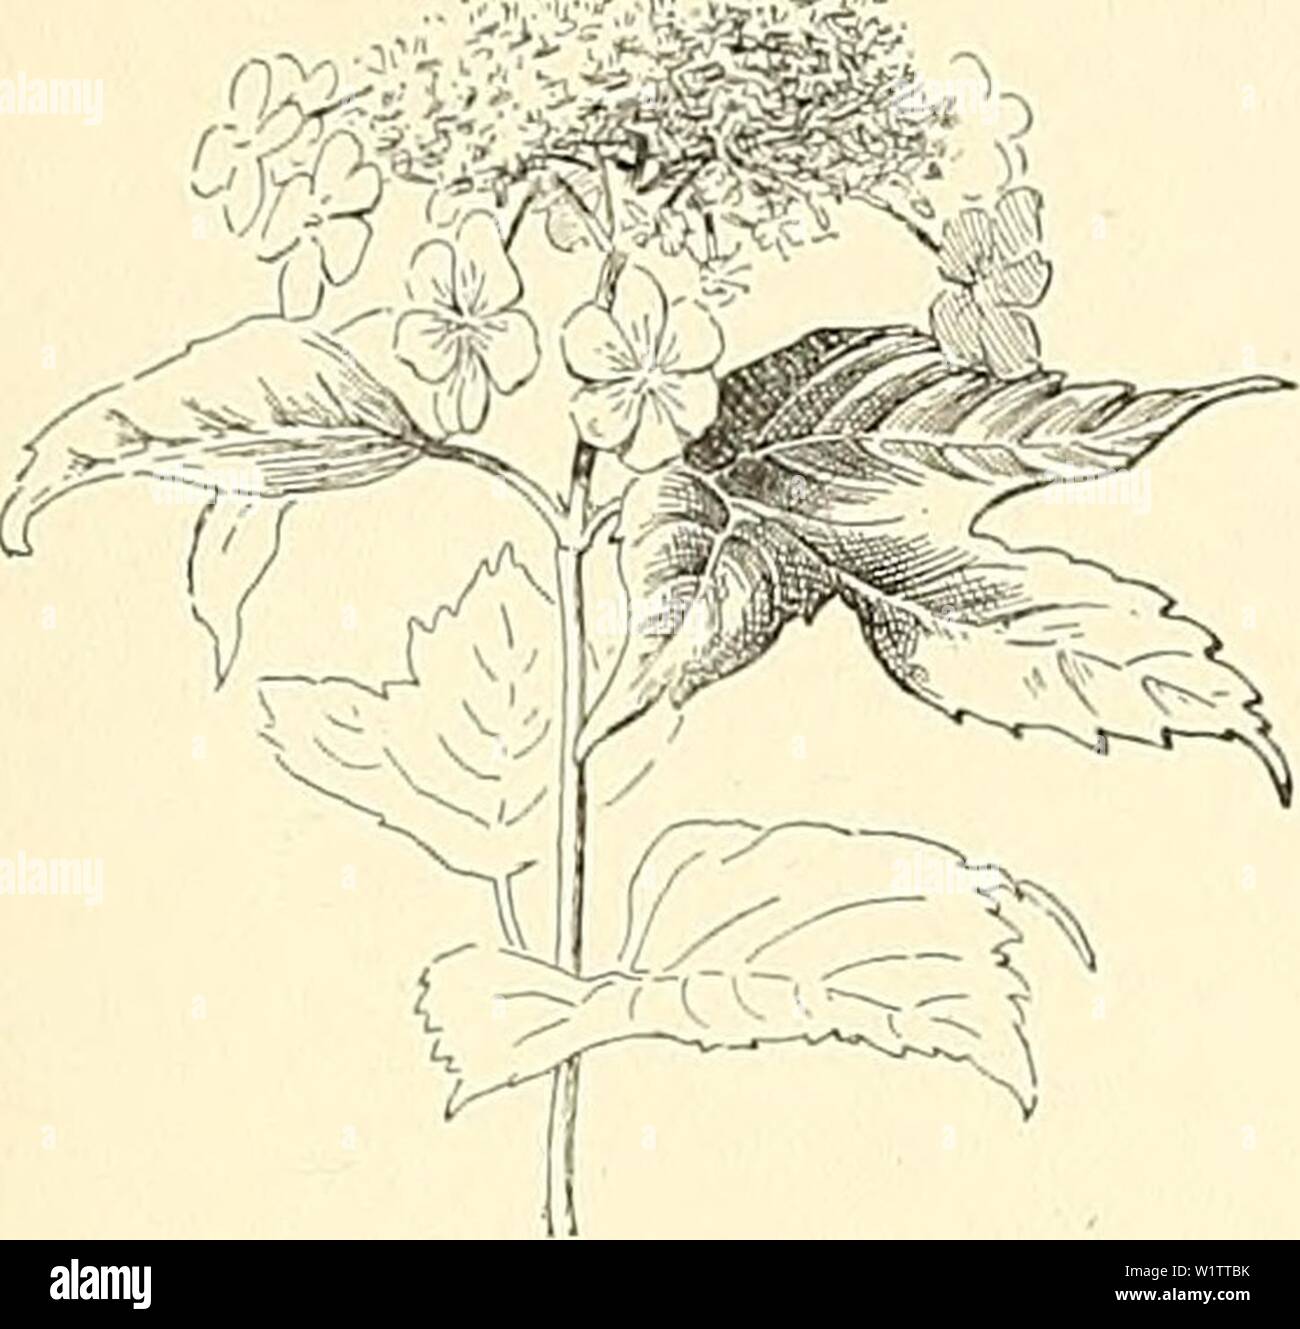 Archive image from page 508 of Cyclopedia of American horticulture, comprising. Cyclopedia of American horticulture, comprising suggestions for cultivation of horticultural plants, descriptions of the species of fruits, vegetables, flowers, and ornamental plants sold in the United States and Canada, together with geographical and biographical sketches  cyclopediaofamer04bail4 Year: 1900 VIBURNUM VICIA 1927 glabrous, 2-5 in. long: fls. yellowish white: cymes long- peduncled, terminal, lK-3 in. broad: fr. almost black, ovoid. May, .June. New Brunswick to Minn., south to N. C. Em. 2:414. —It grow Stock Photo